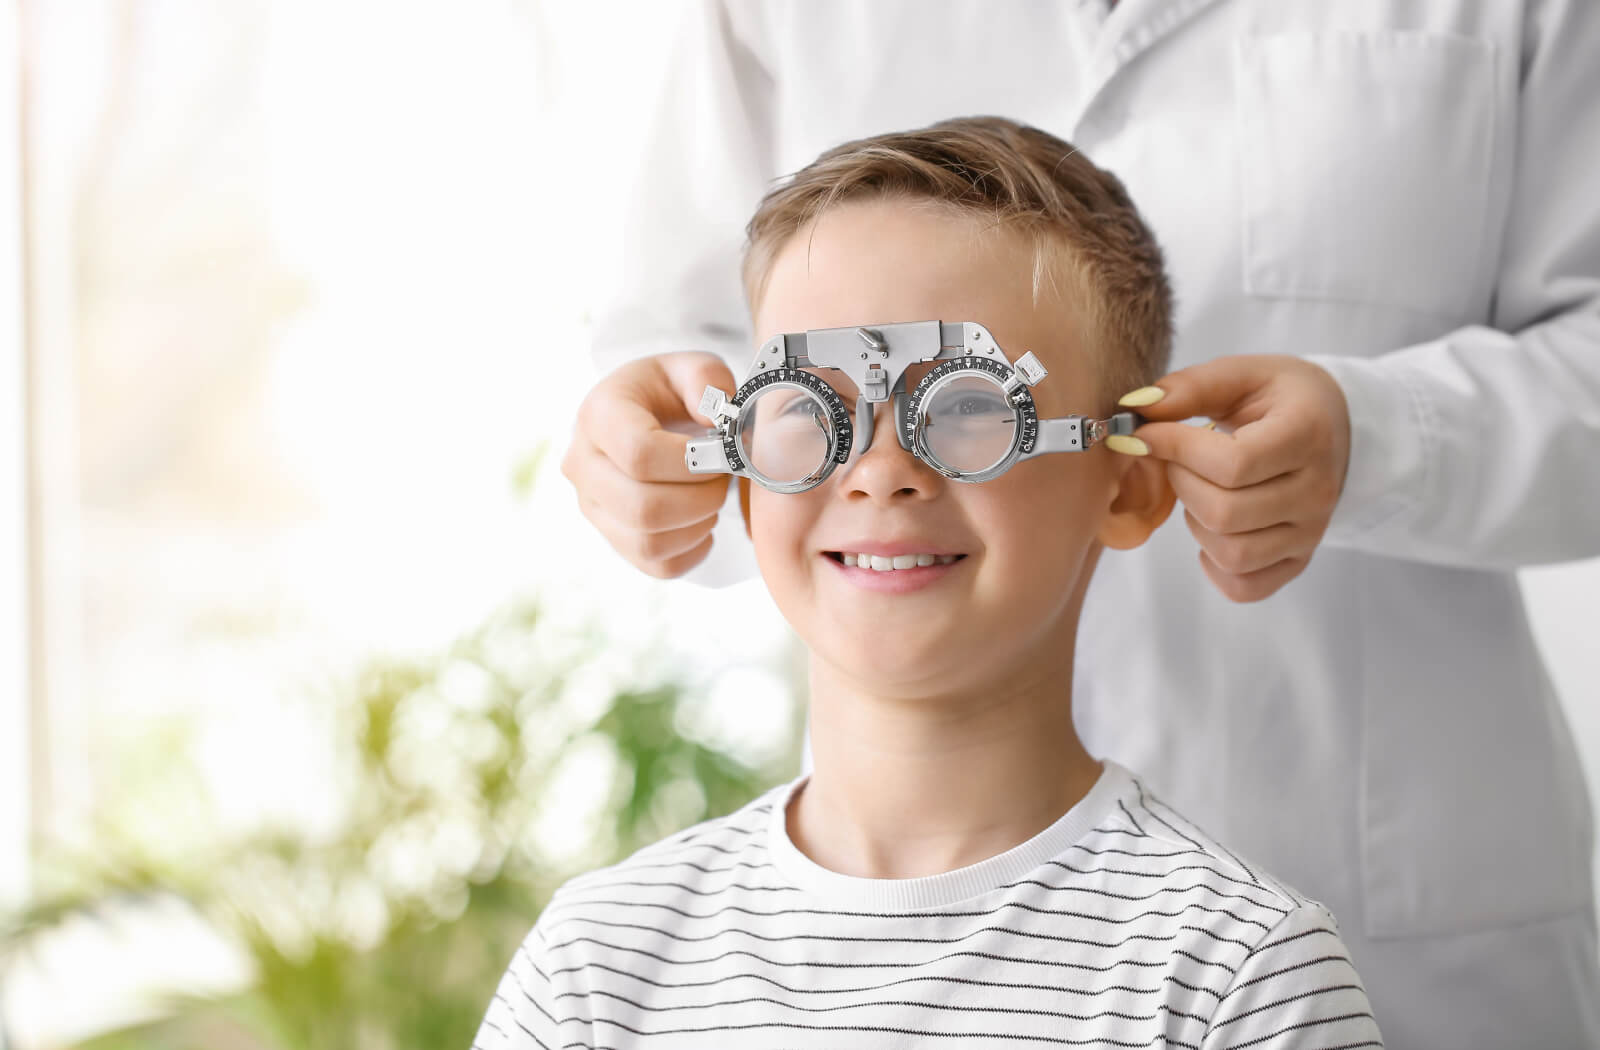 A young boy at the optical clinic is getting his eye test for his eyeglasses.